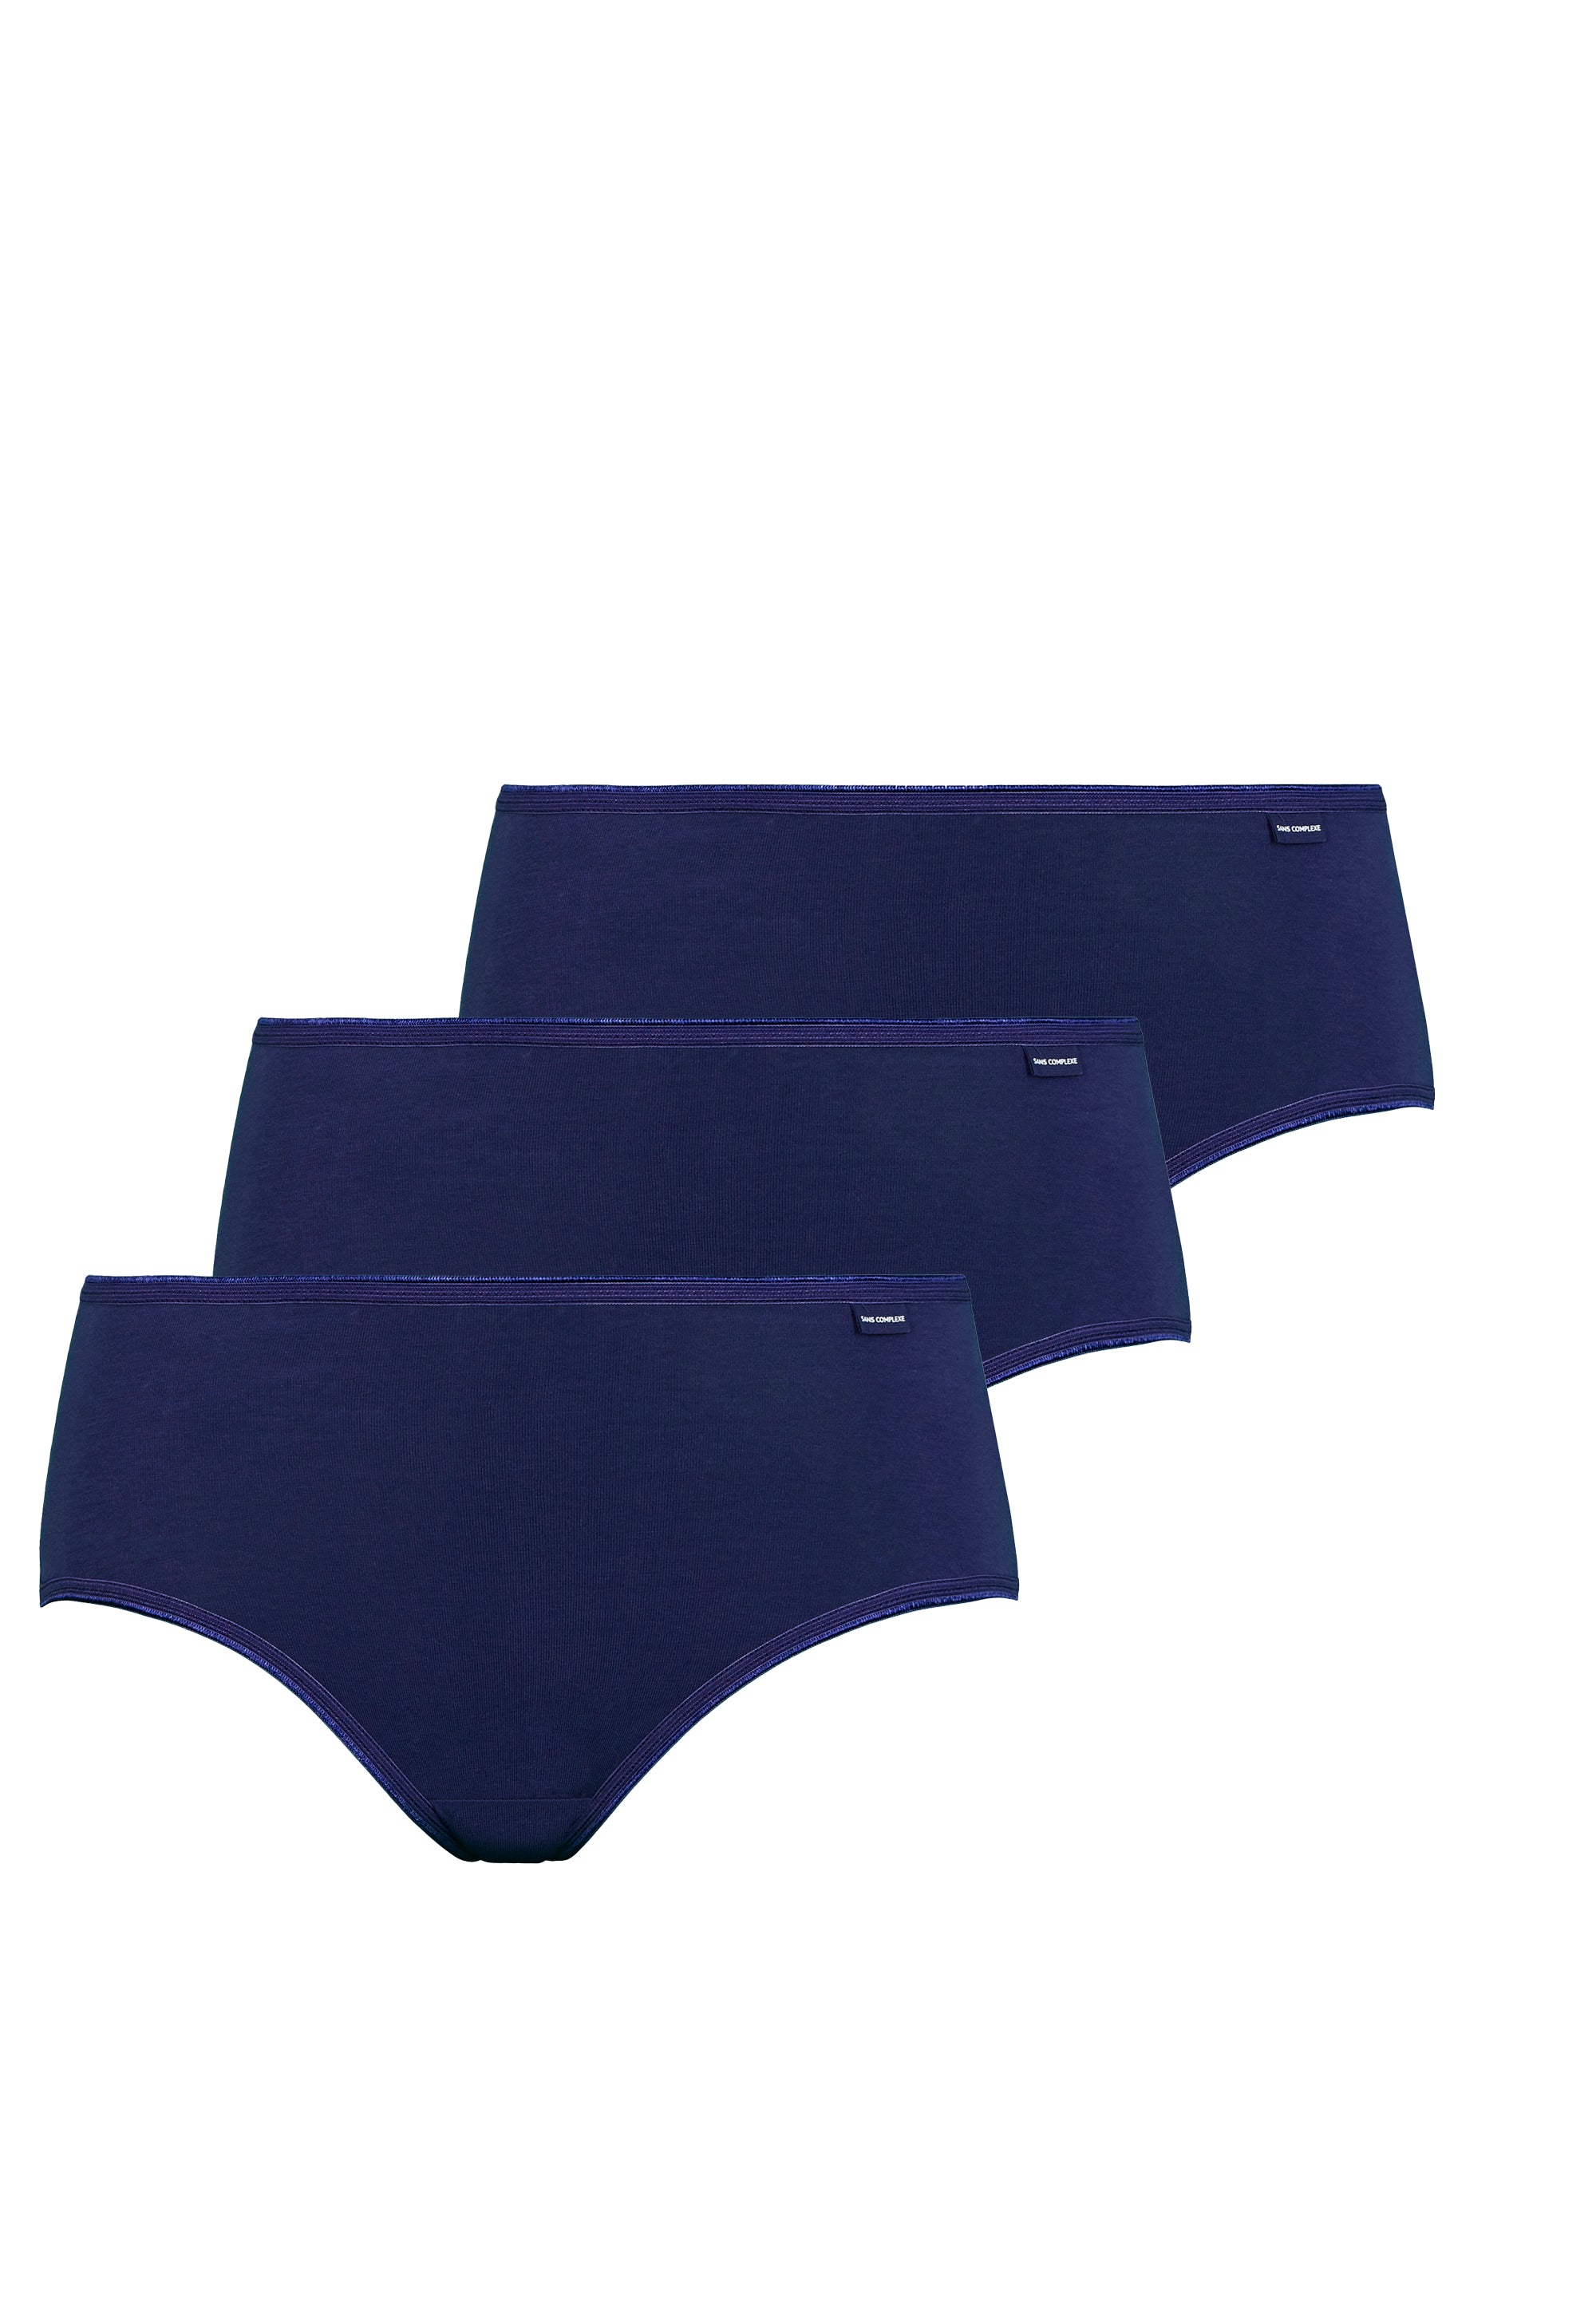 Briefs - Pack of 3 Simplement Coton B Blue Ribbon